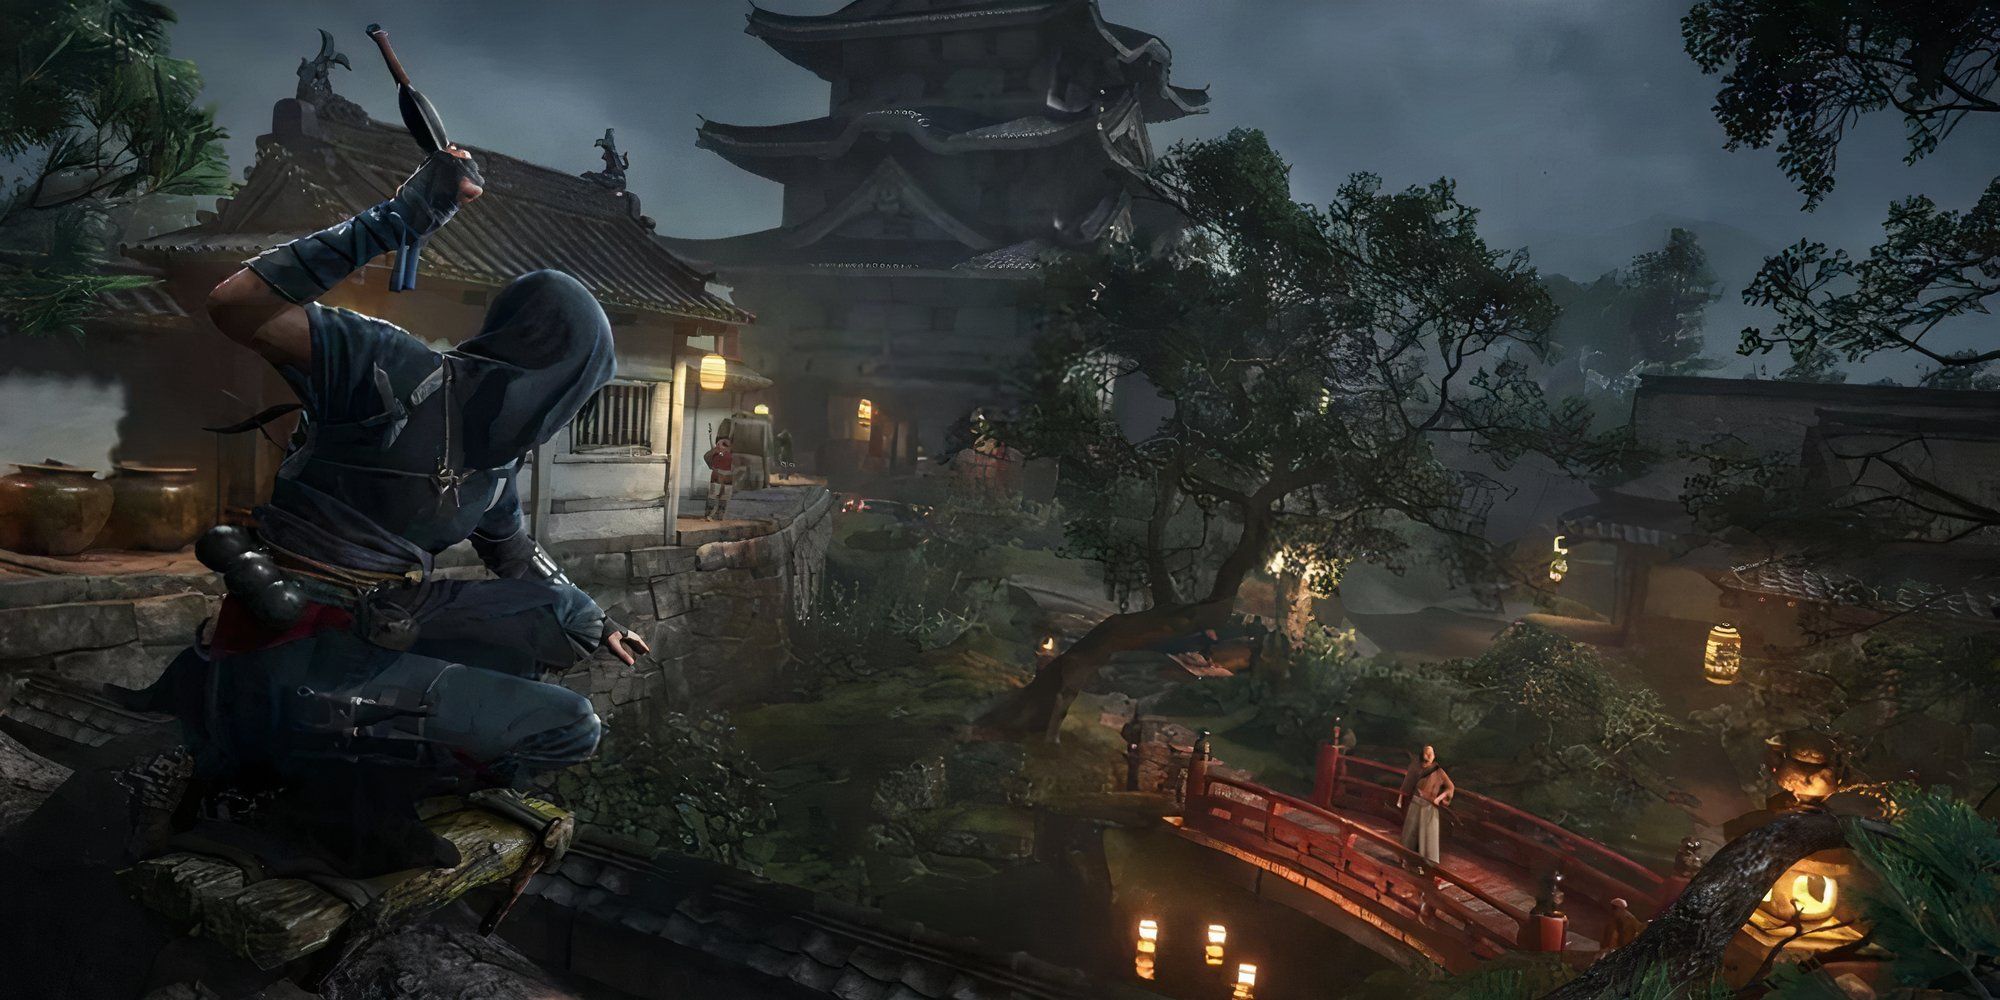 Still from Assassin's Creed Shadows of Naoe crouching on a rooftop over a Japanese town holding a kunai.